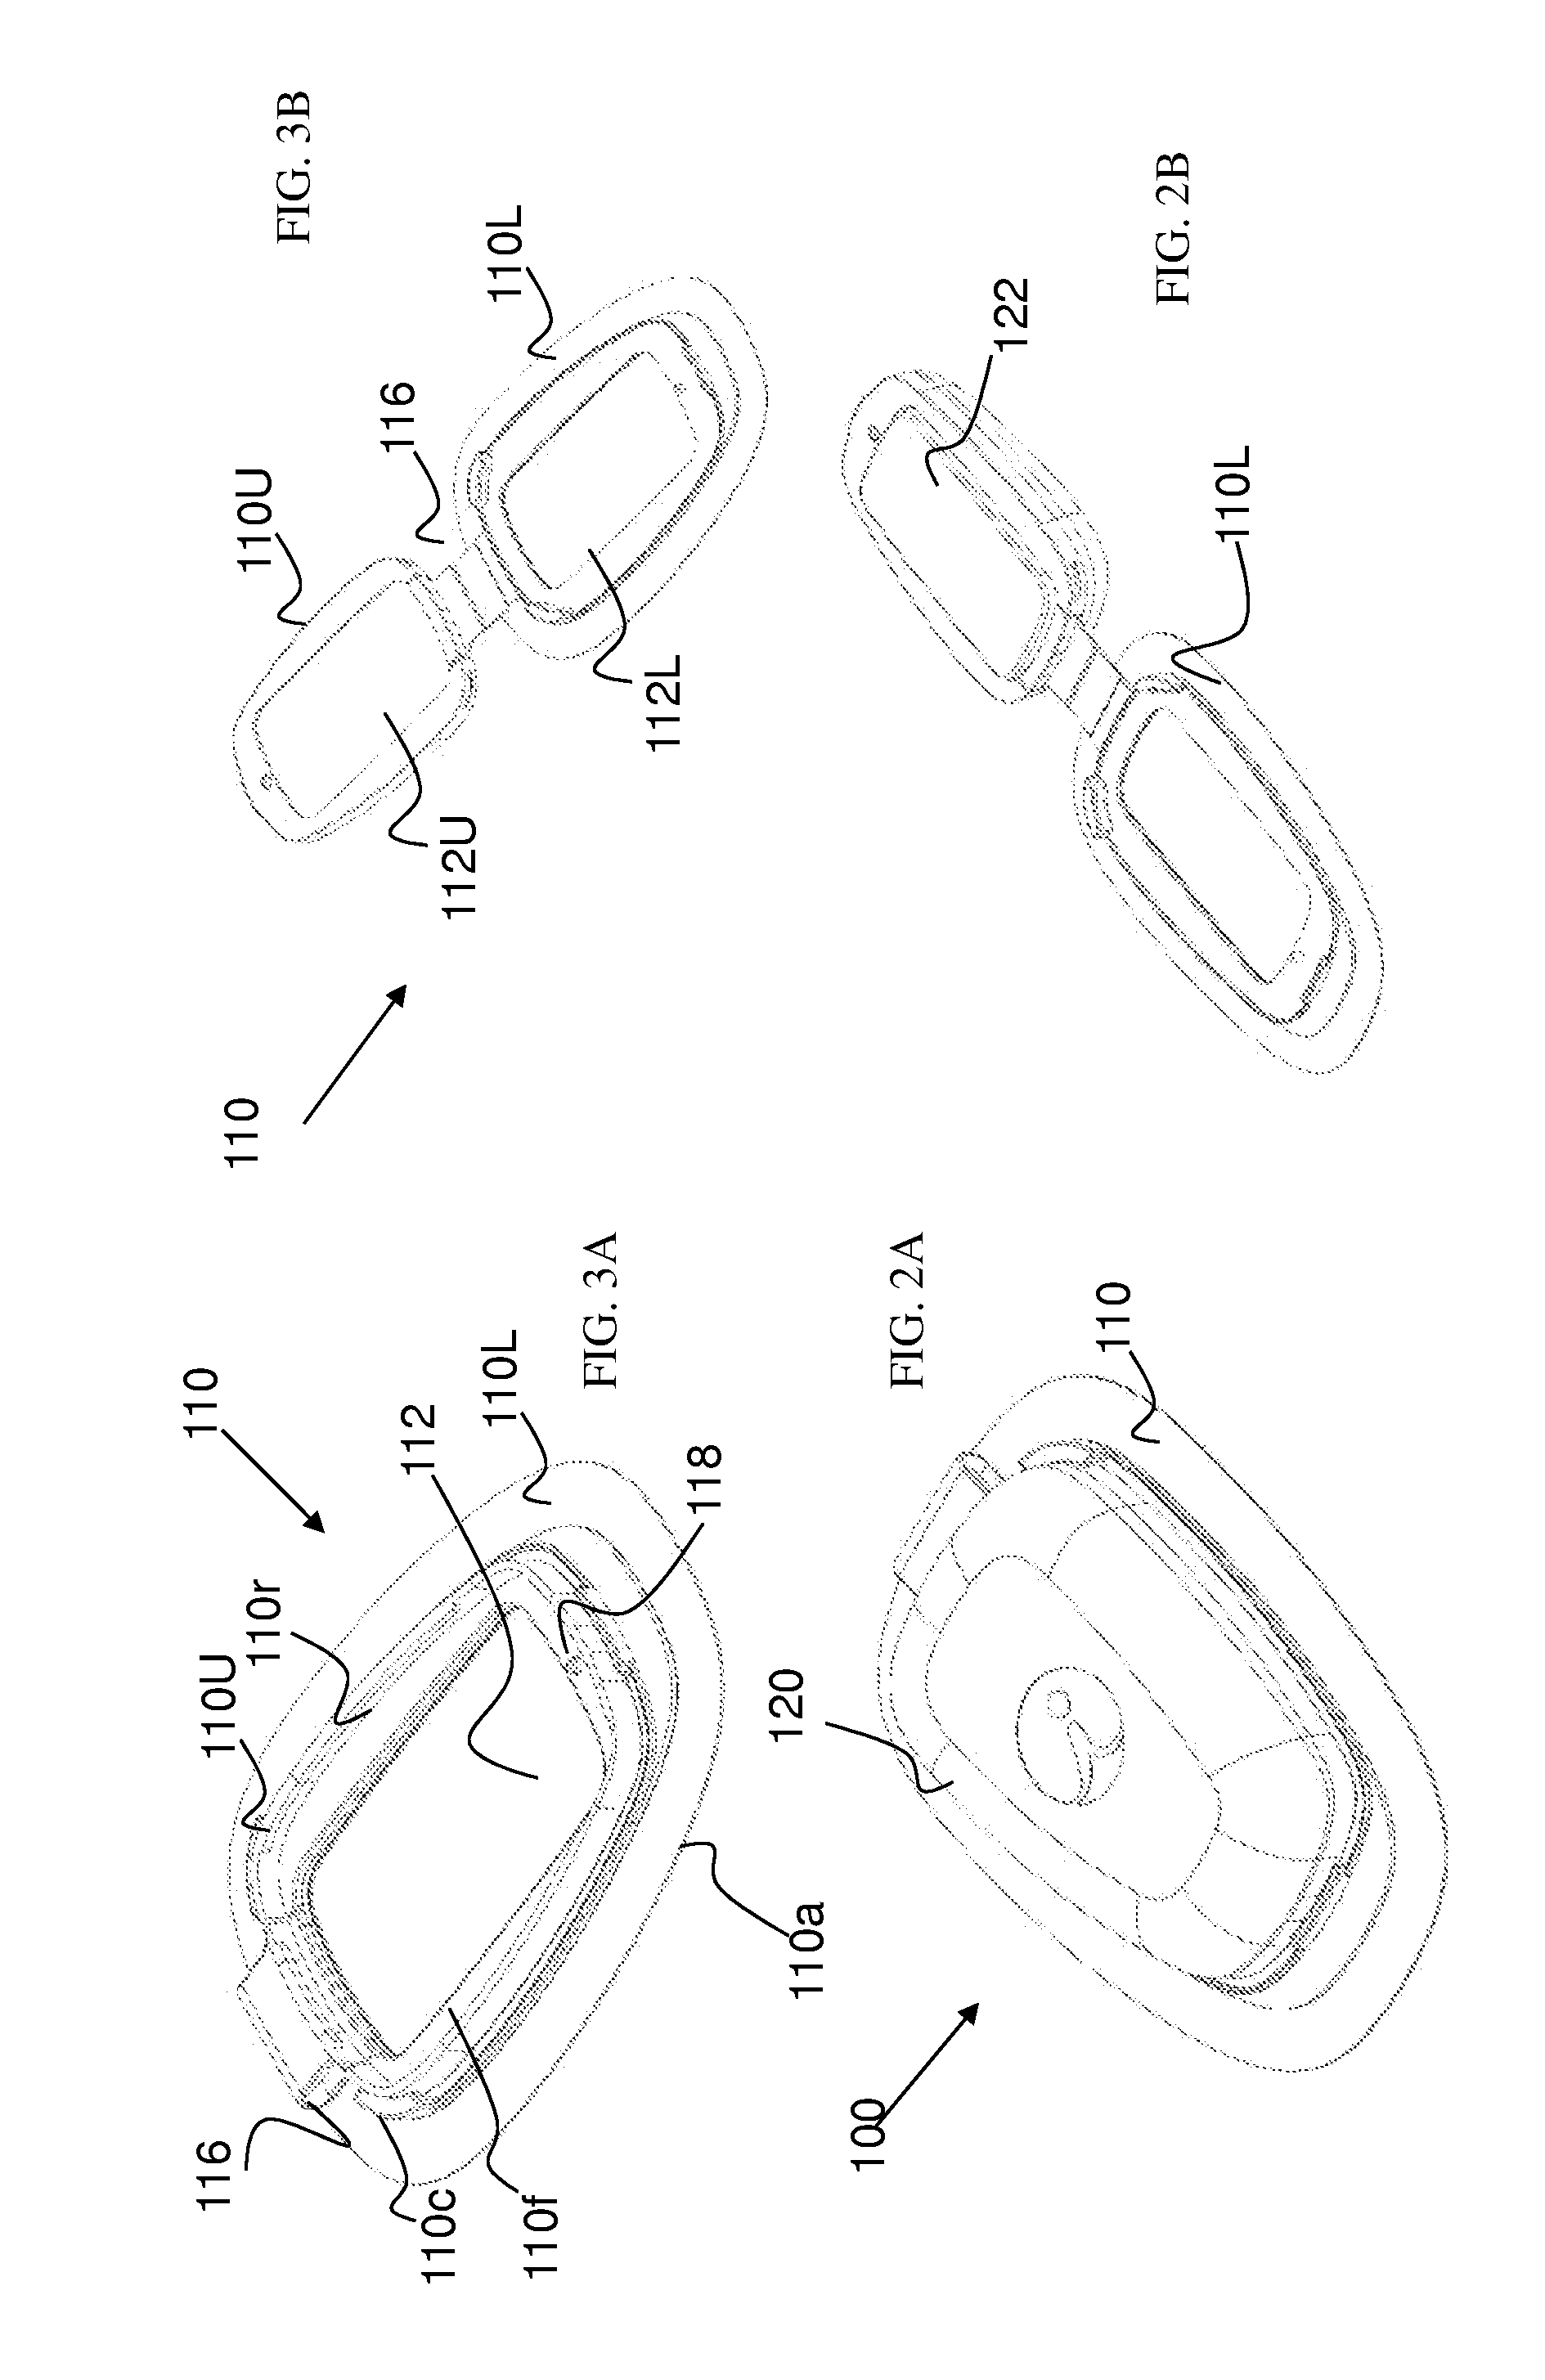 Device, system and method for facilitating syringe based drug delivery and management thereof